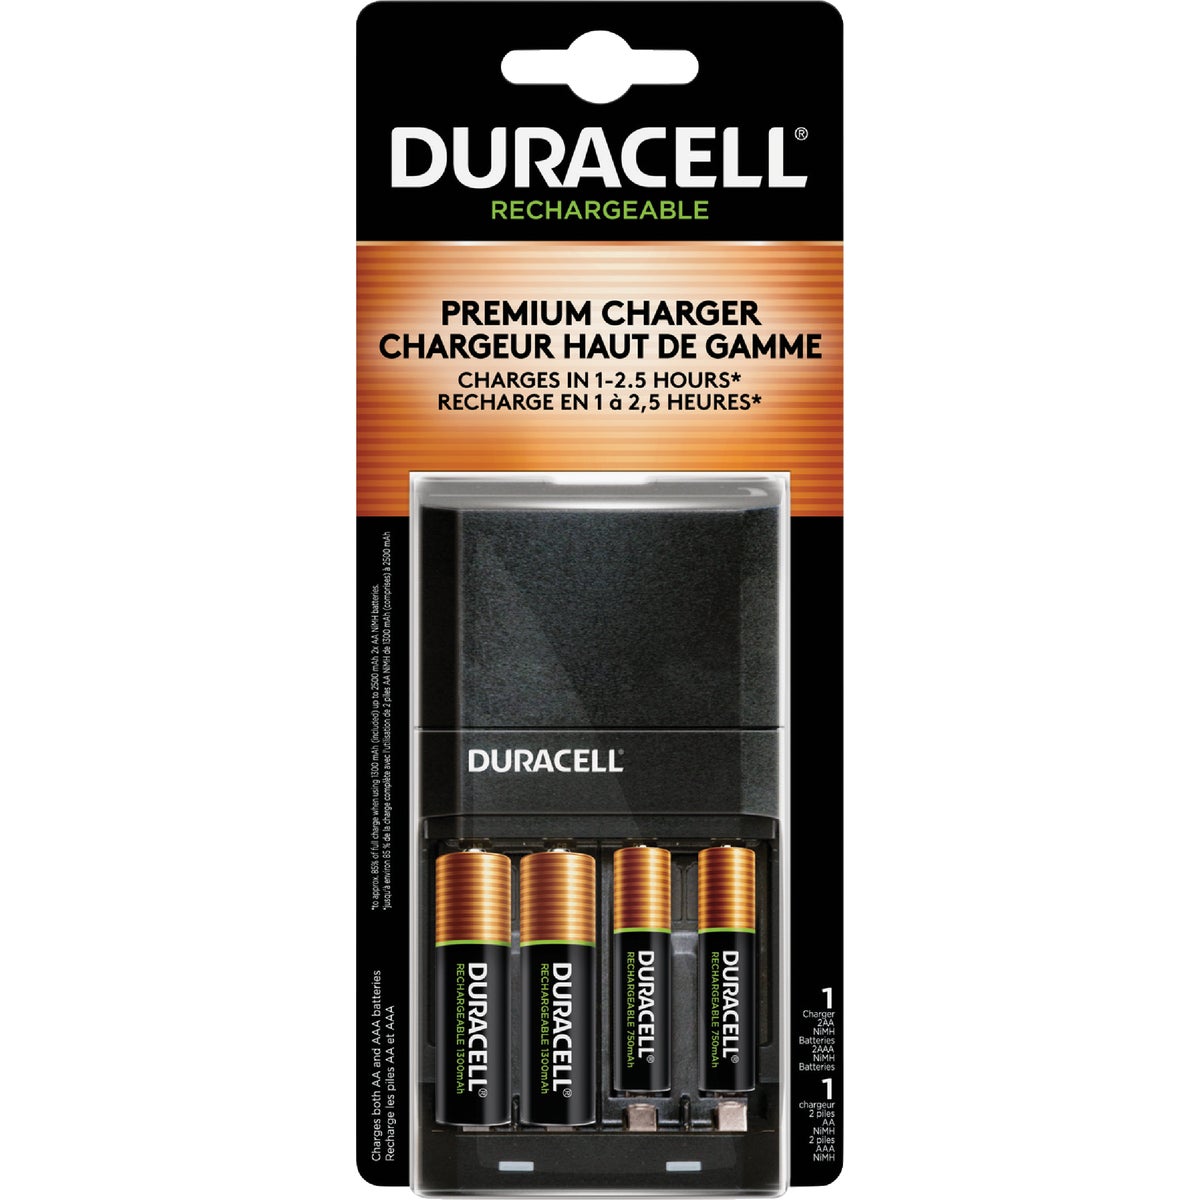 Item 800719, Duracell Quantum Ion Speed 4000 battery charger.